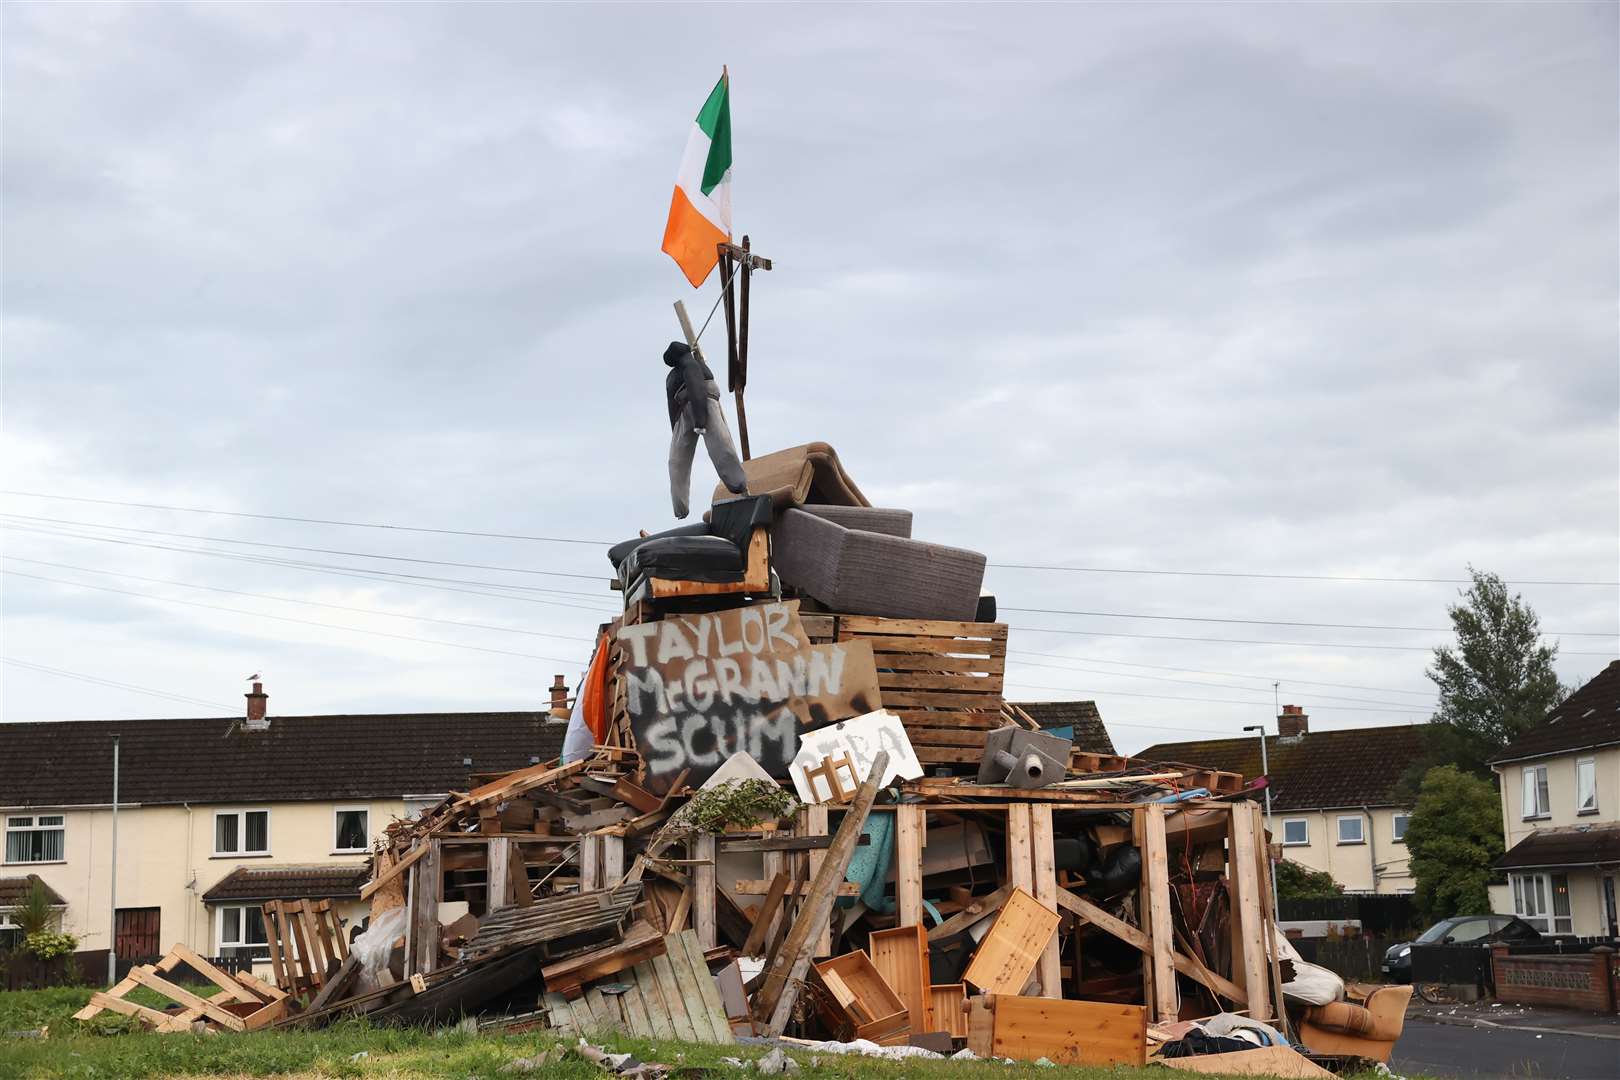 An effigy above a poster with the name of Sinn Fein councillorTaylor McGrann appeared on a bonfire in Newtownabbey (PA)